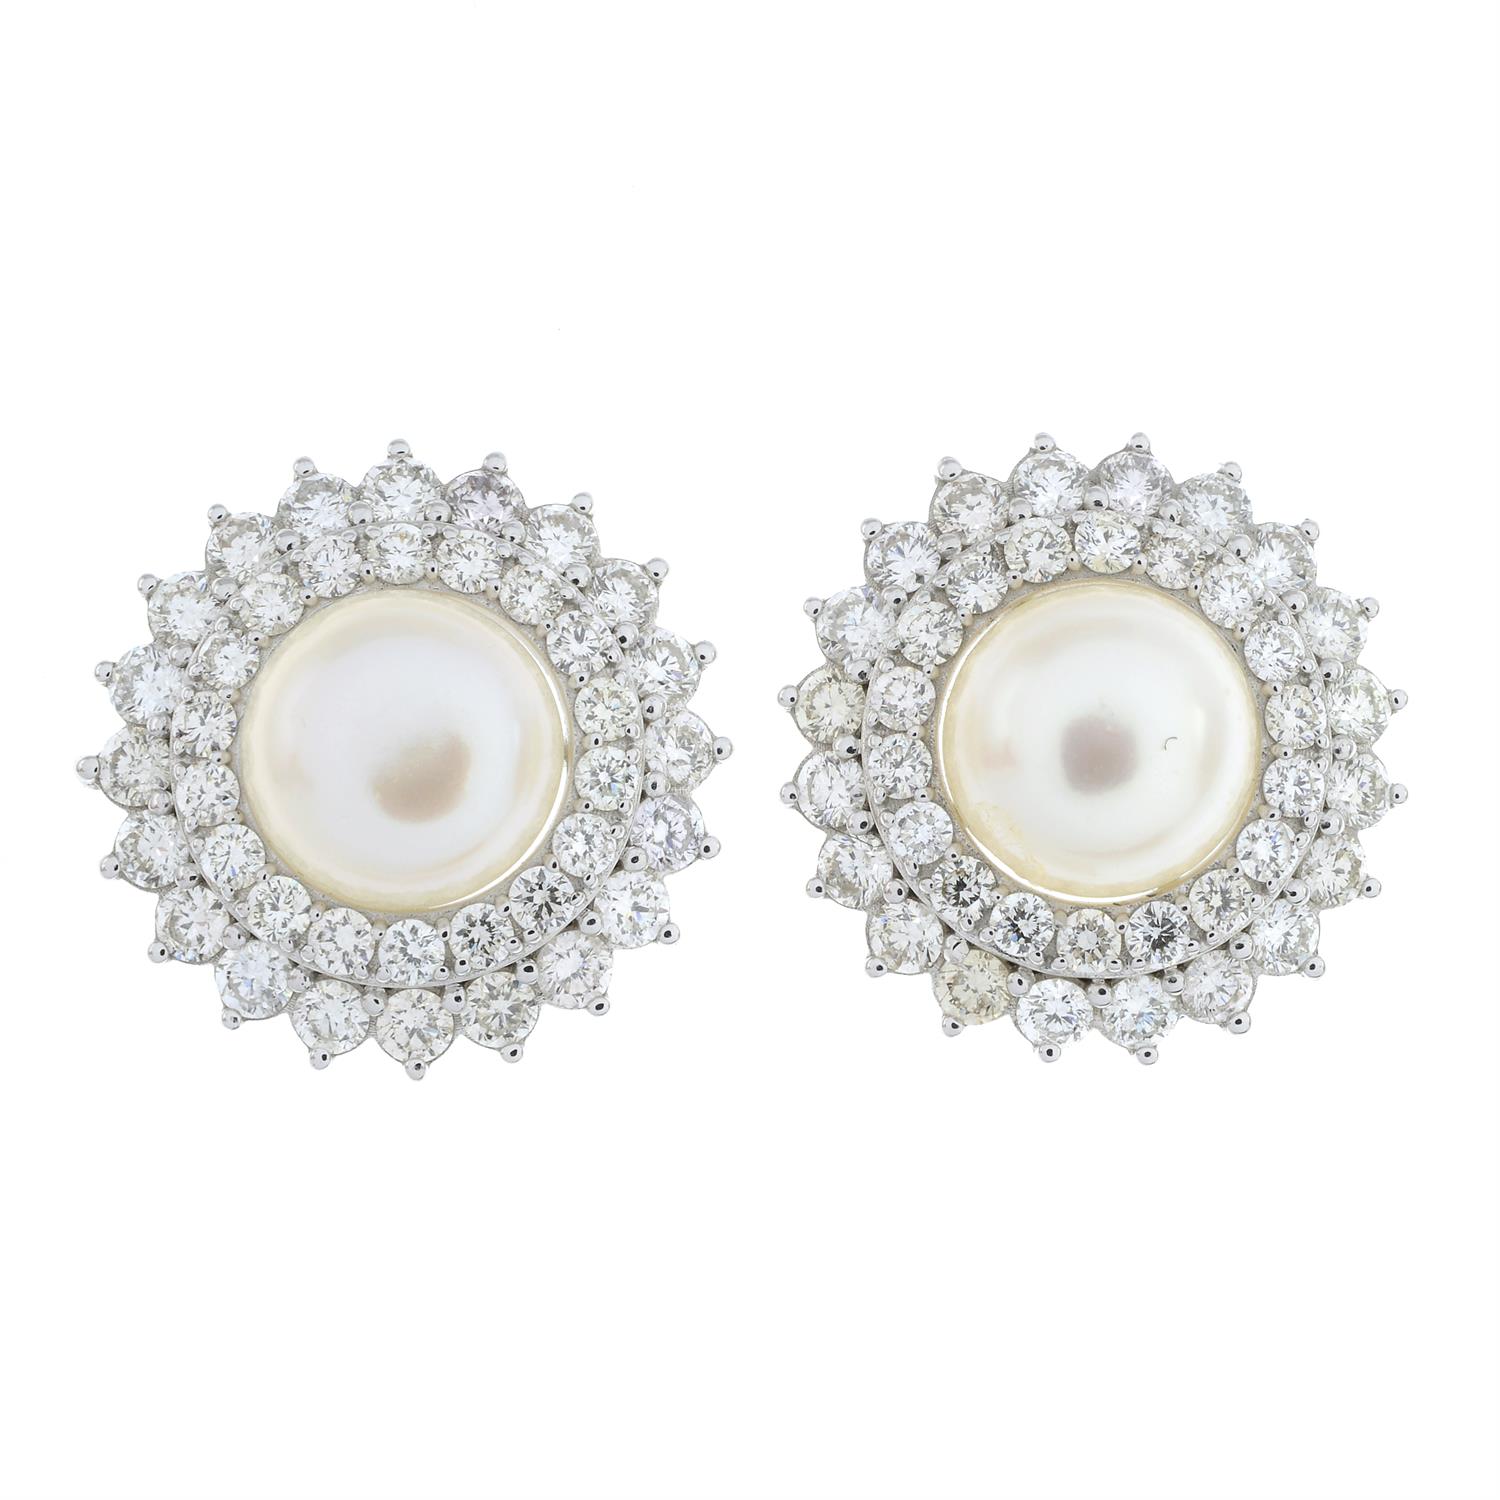 Cultured pearl and diamond earrings - Image 2 of 4